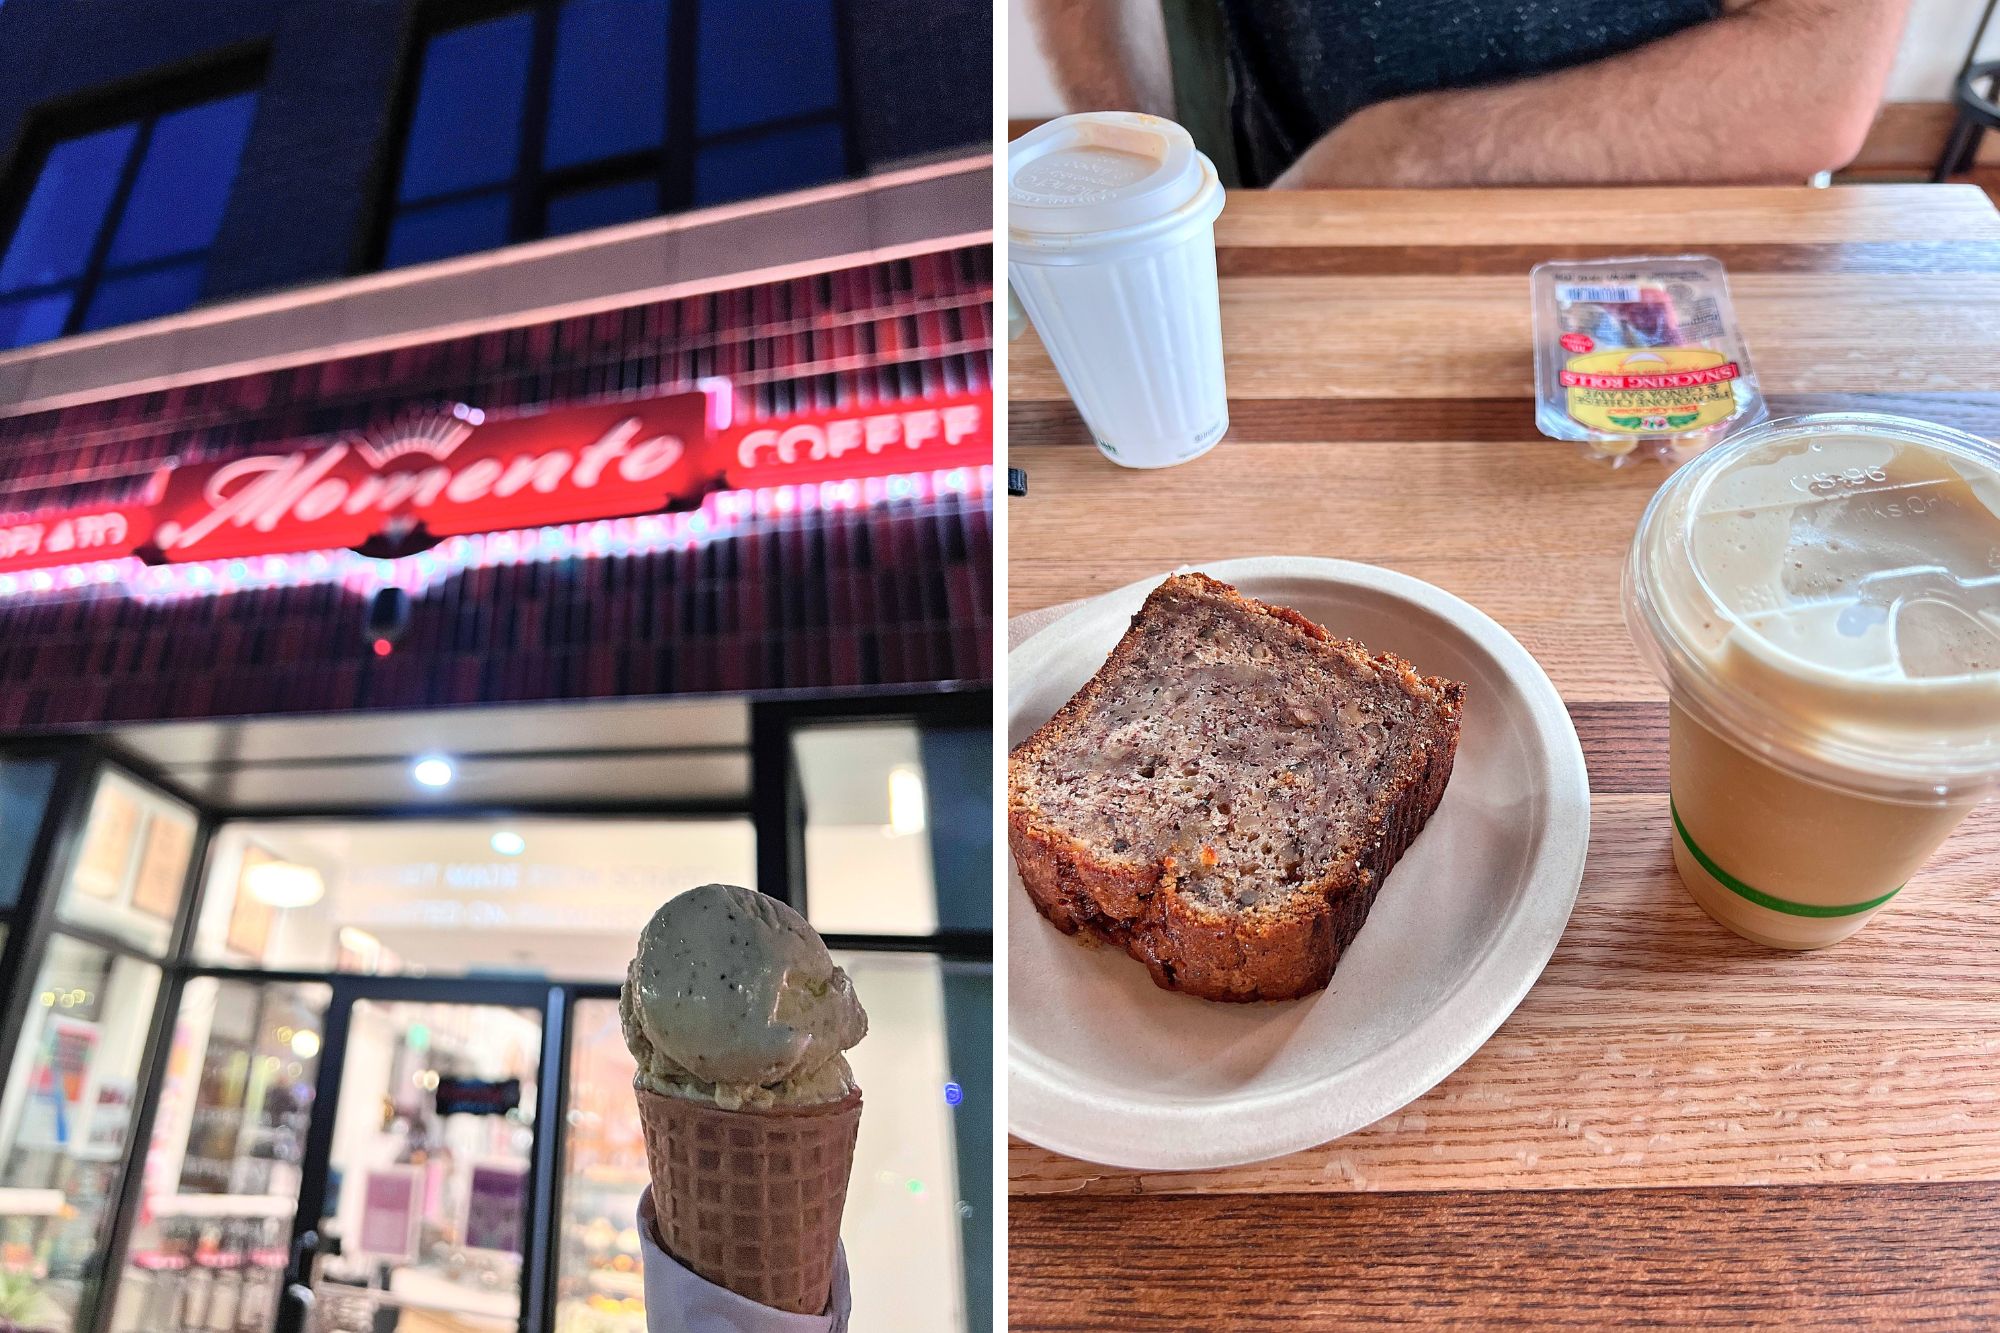 Two images: one of a gelato cone and another of a slice of banana bread